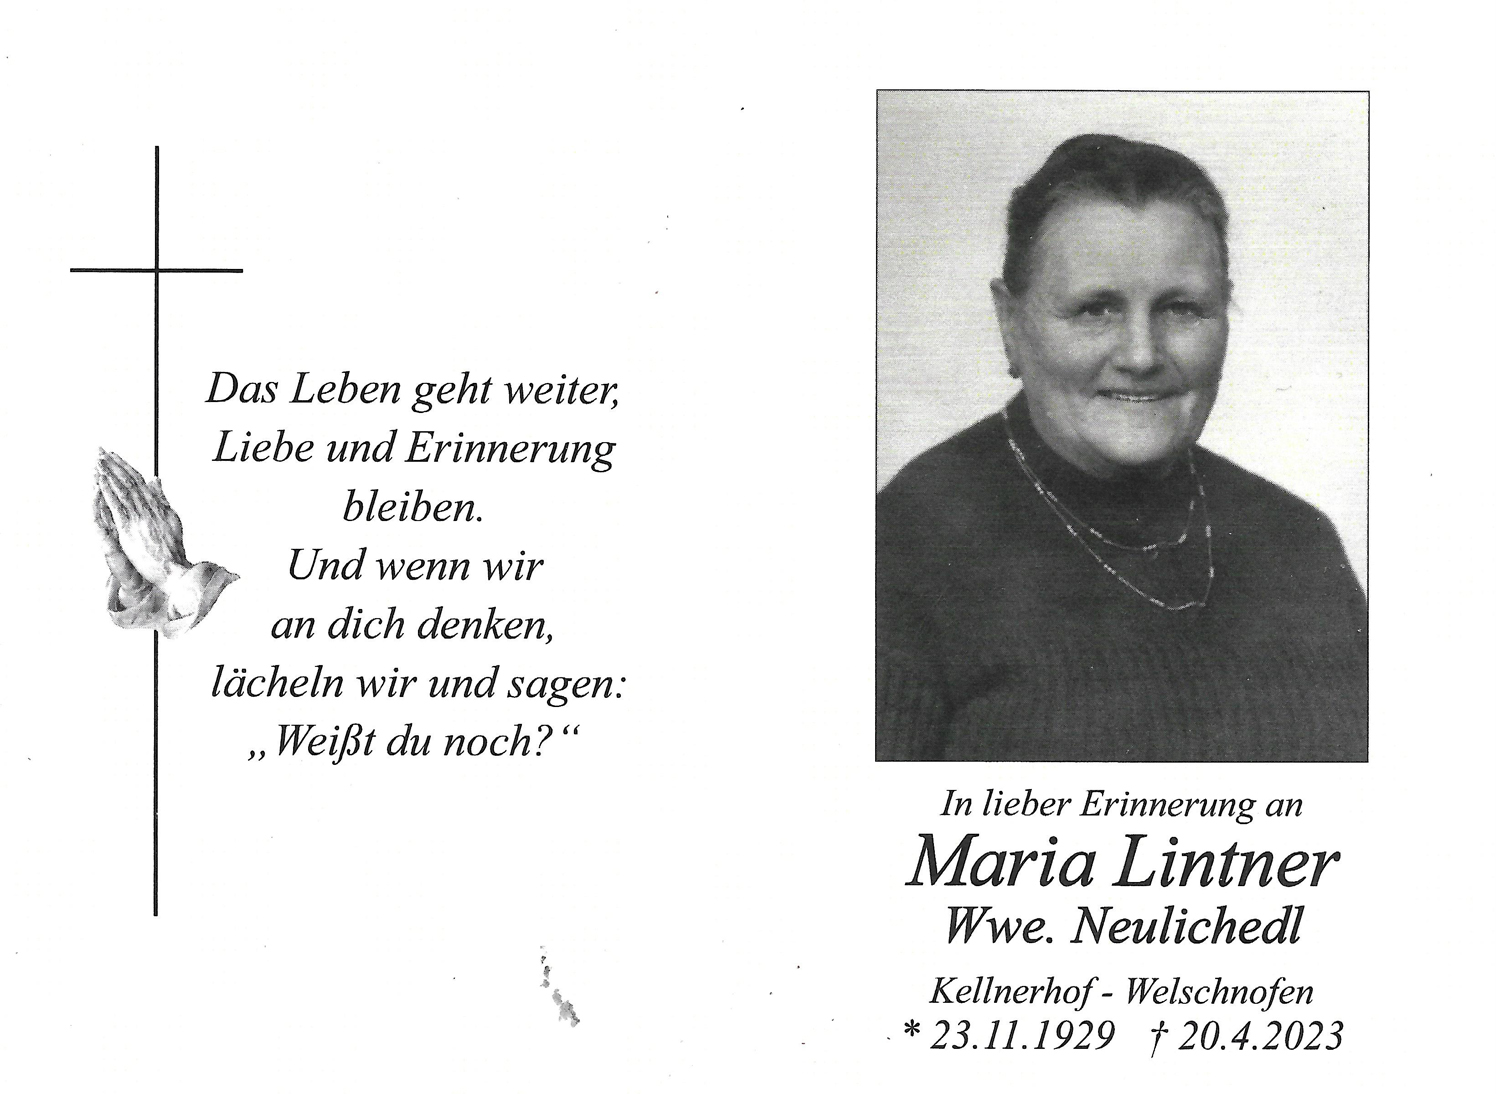 Maria Lintner Neulichedl